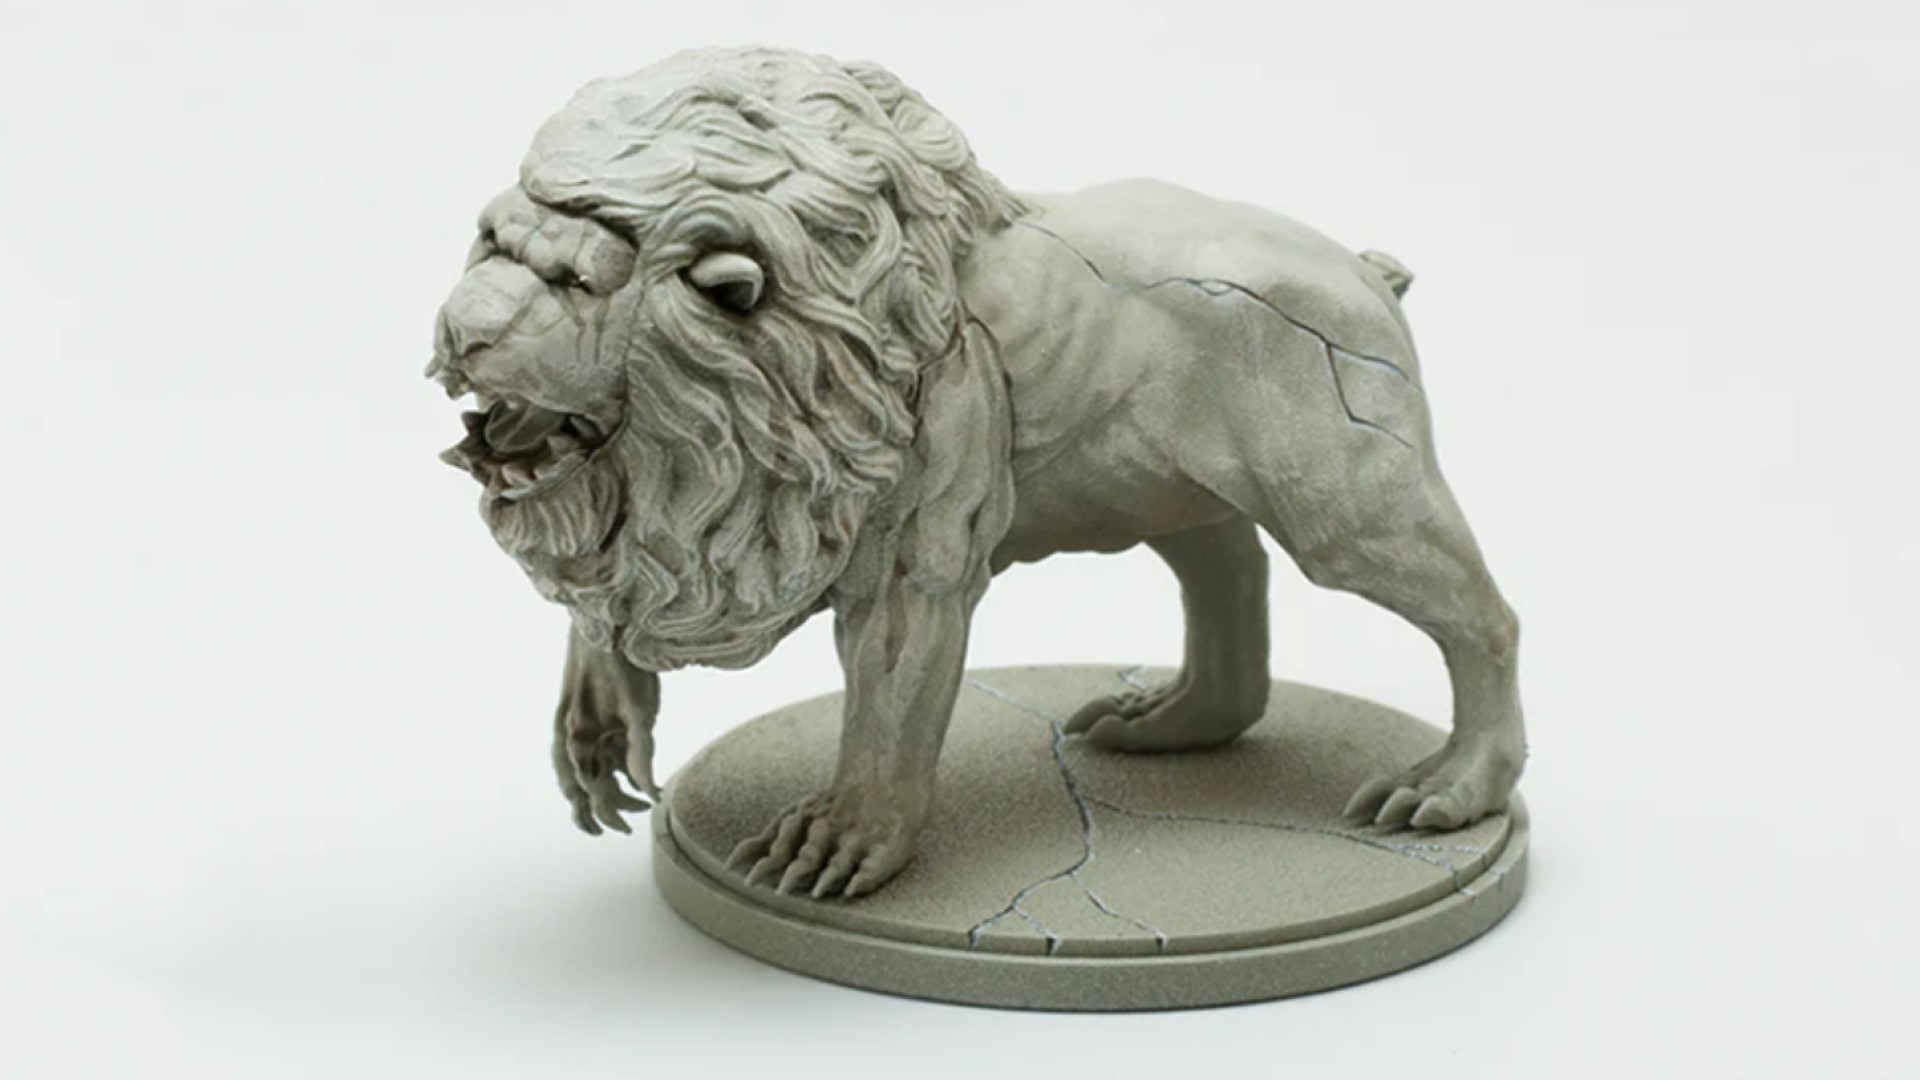 RPG board games - a gigantic miniature of a lion